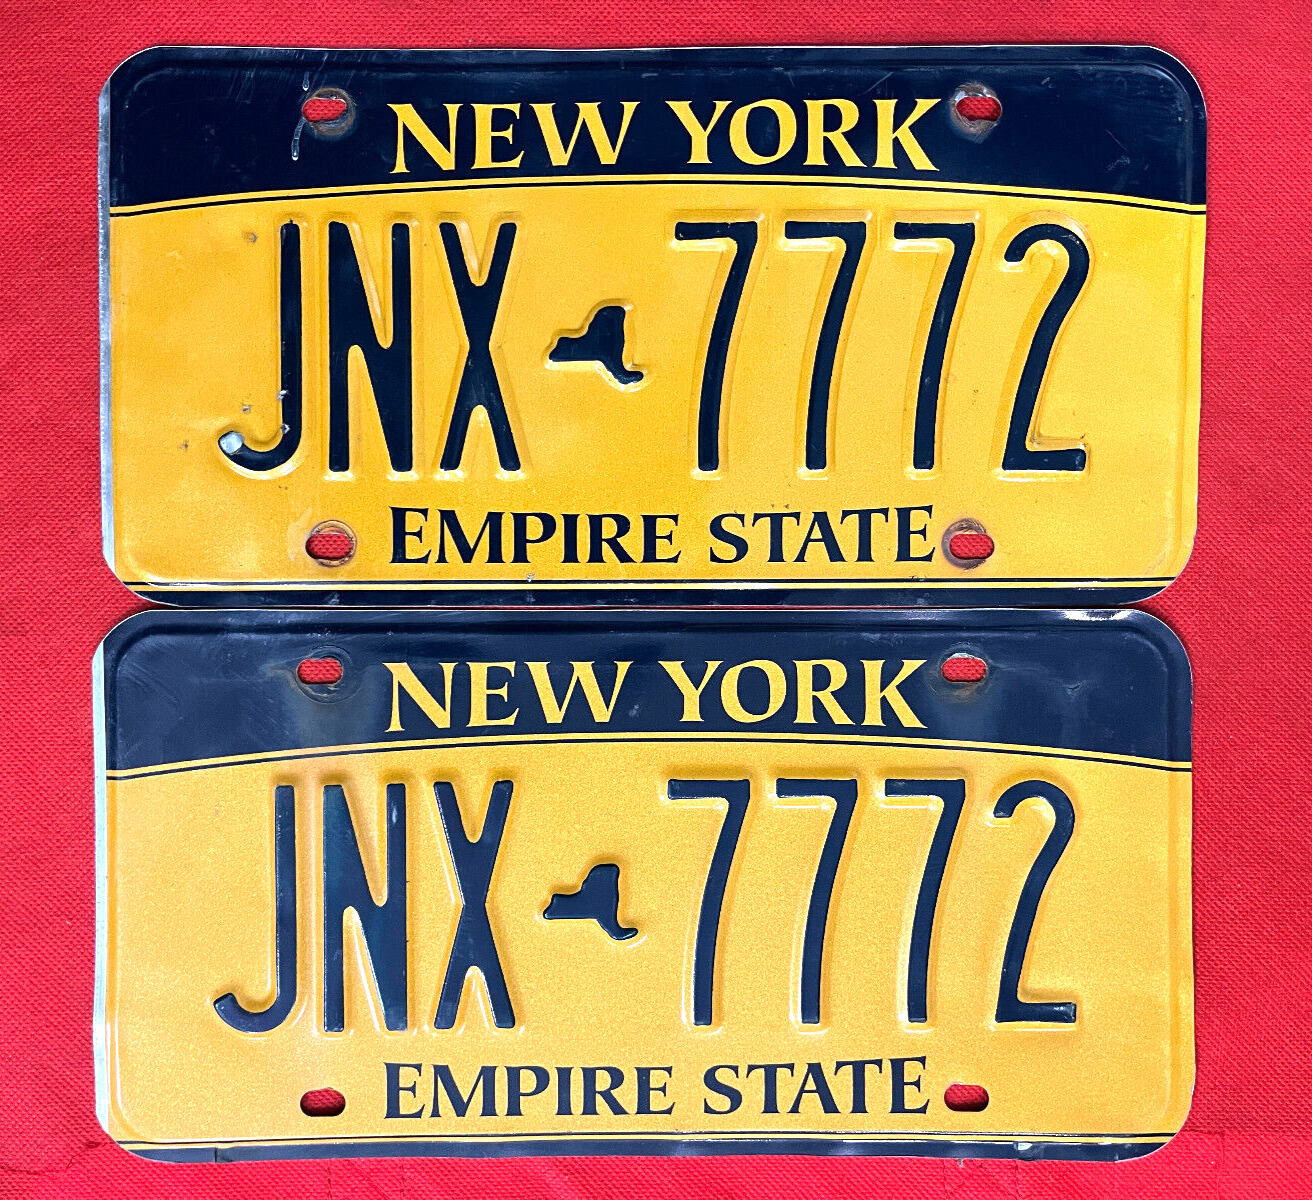 New York License Plate Pair JNX 7772 .... Expired / Crafts / Collect / Specialty